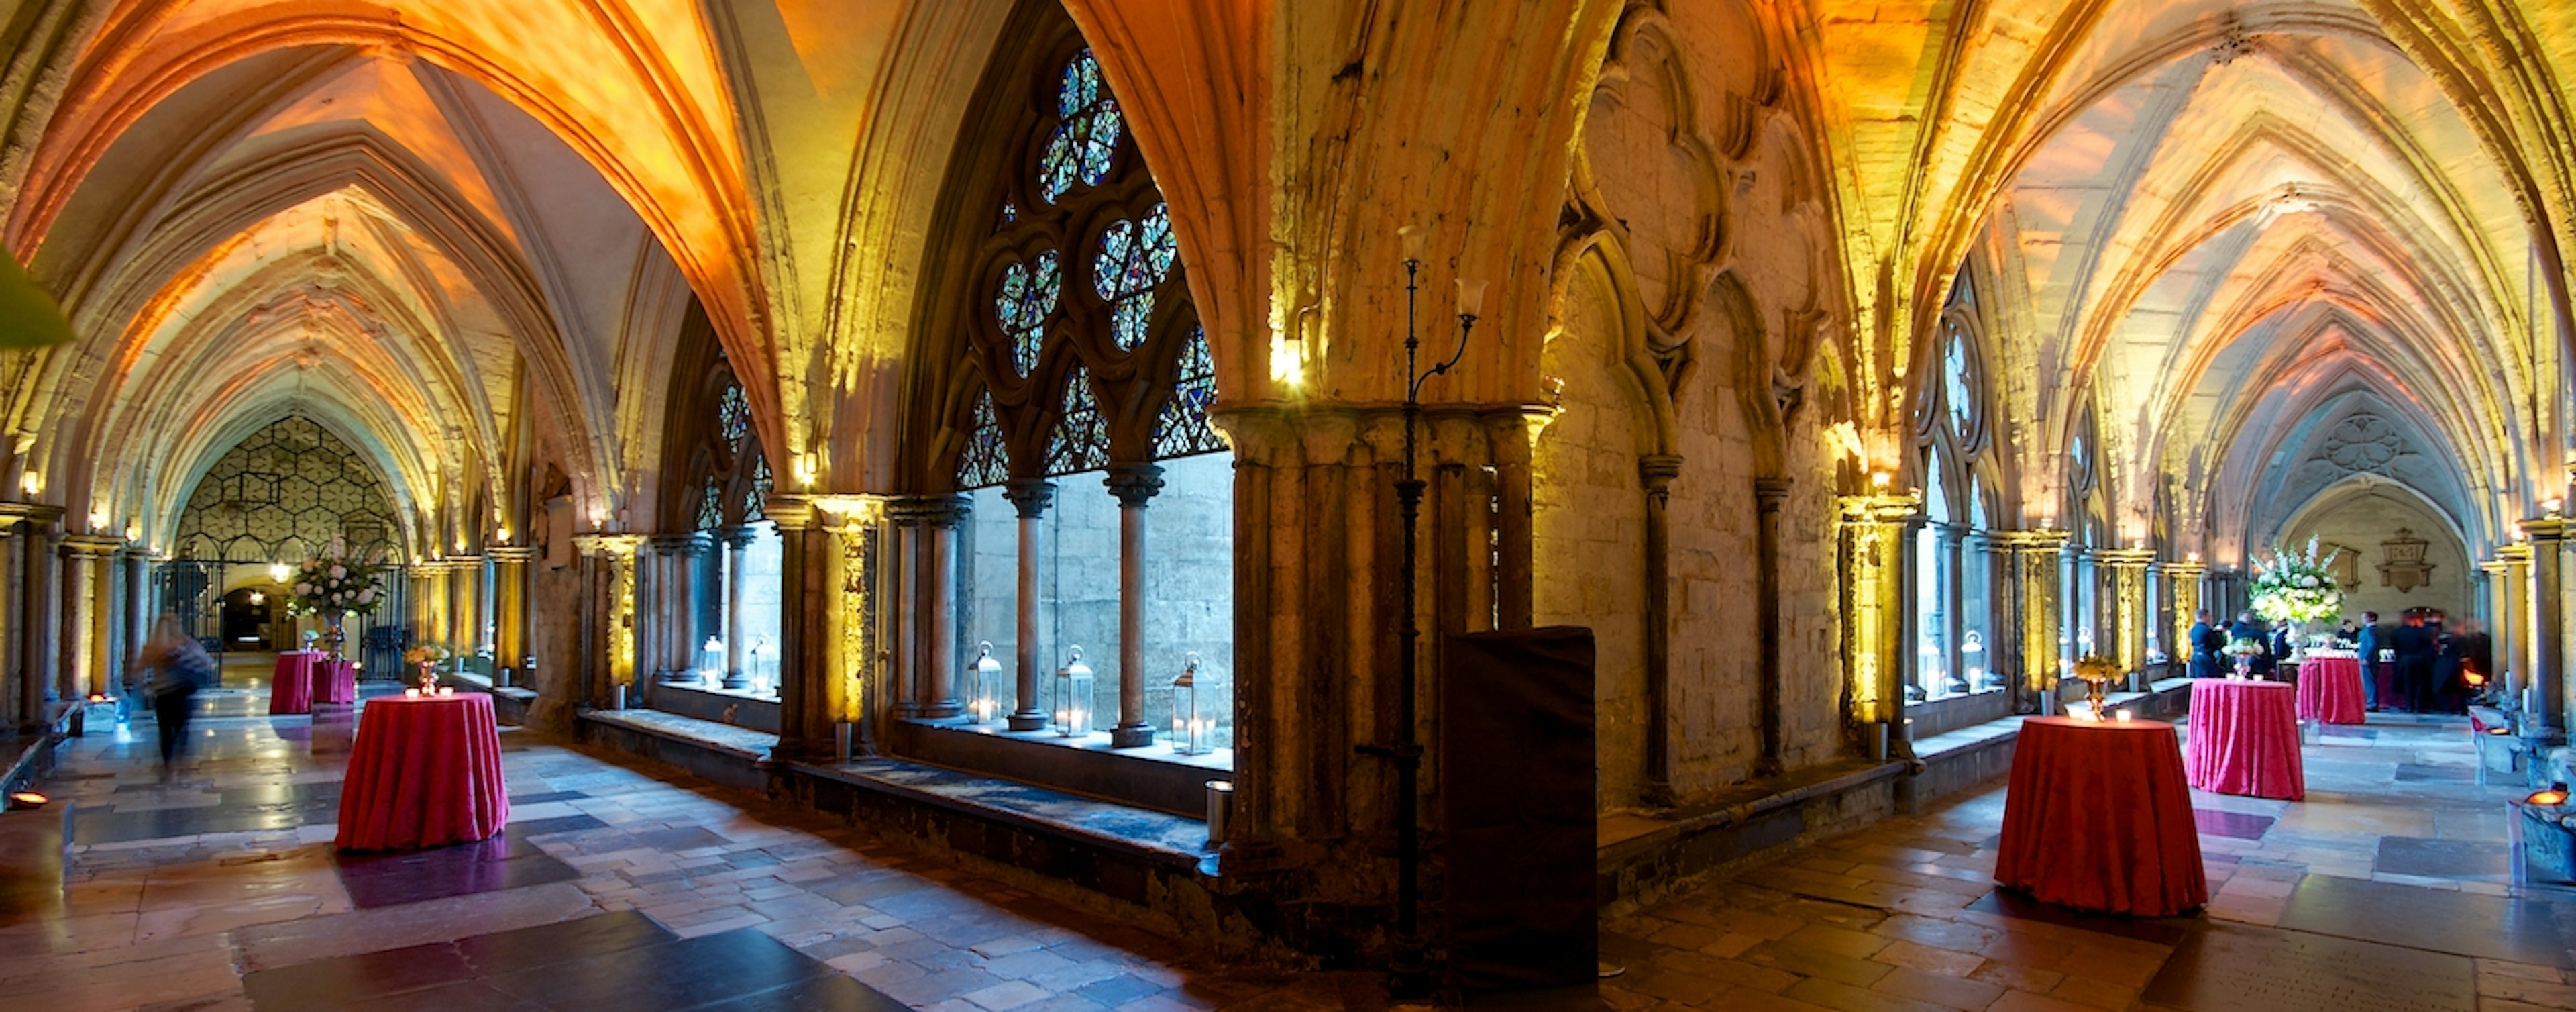 East and North Cloisters.JPG